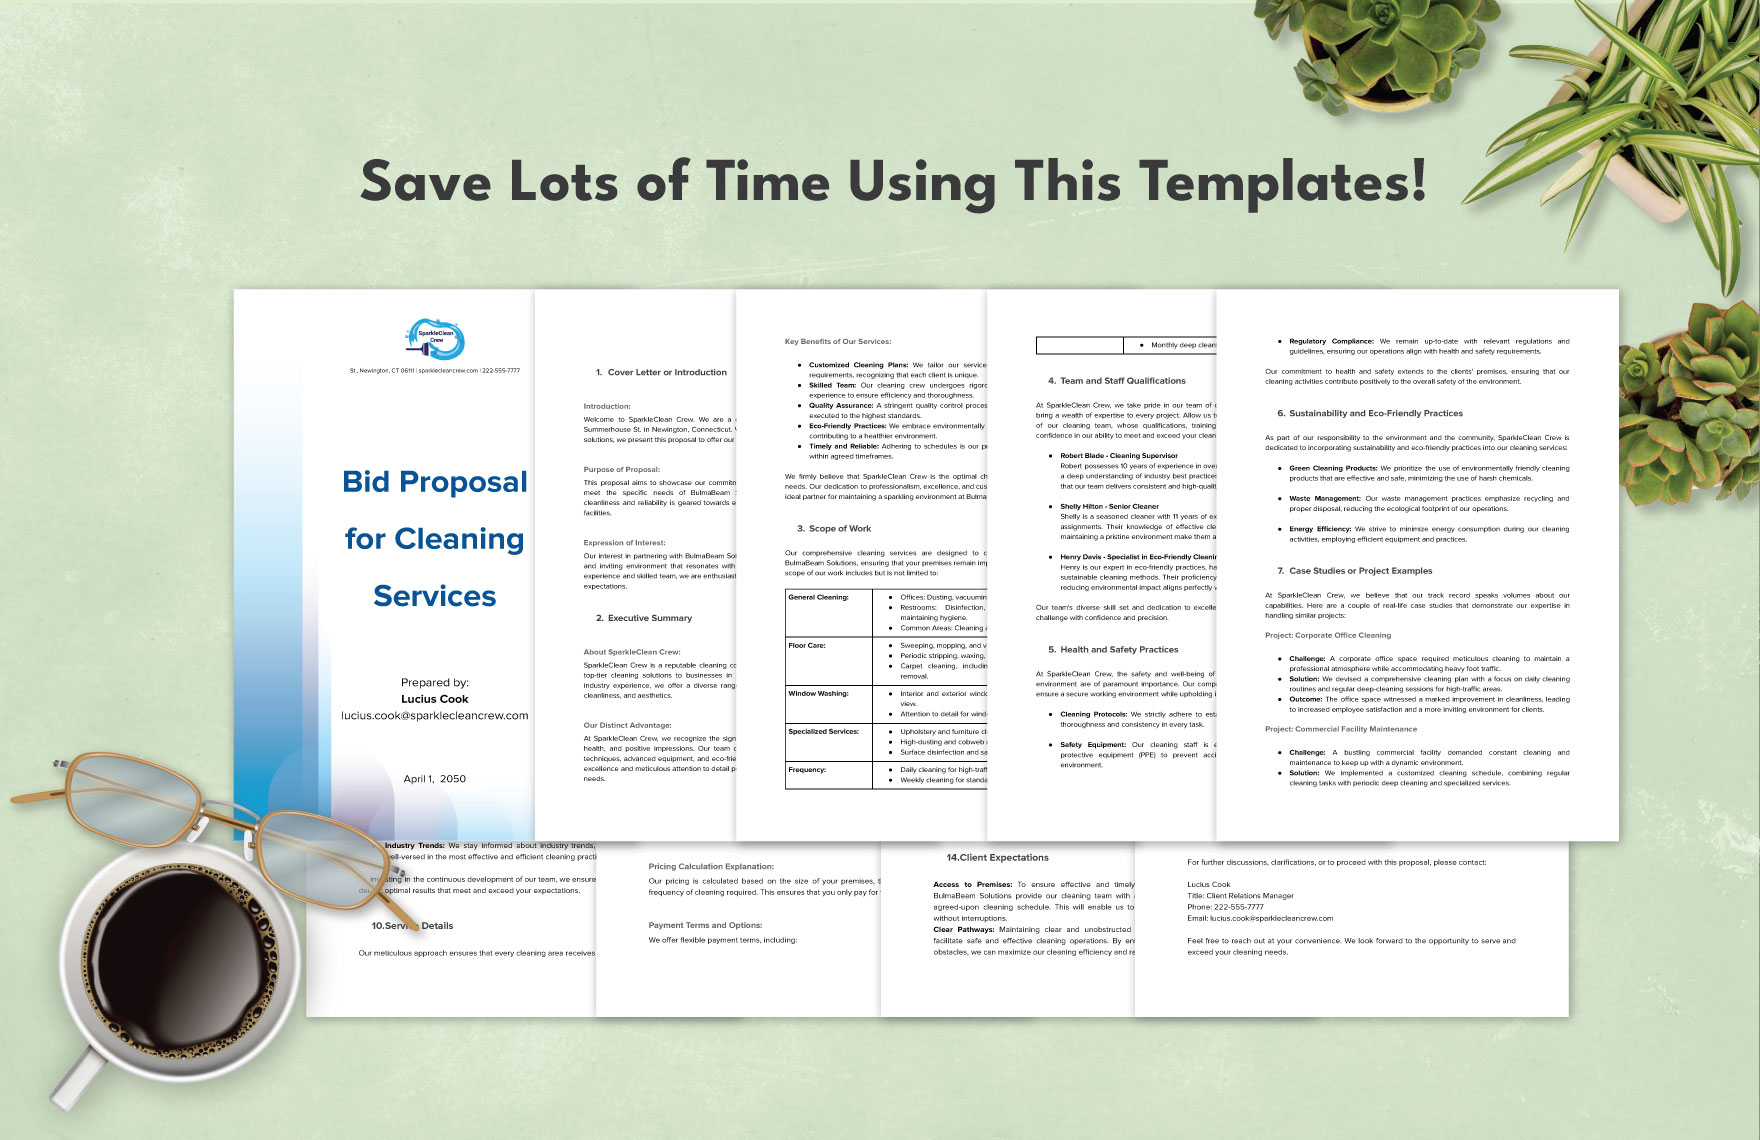 Bid Proposal for Cleaning Services Template